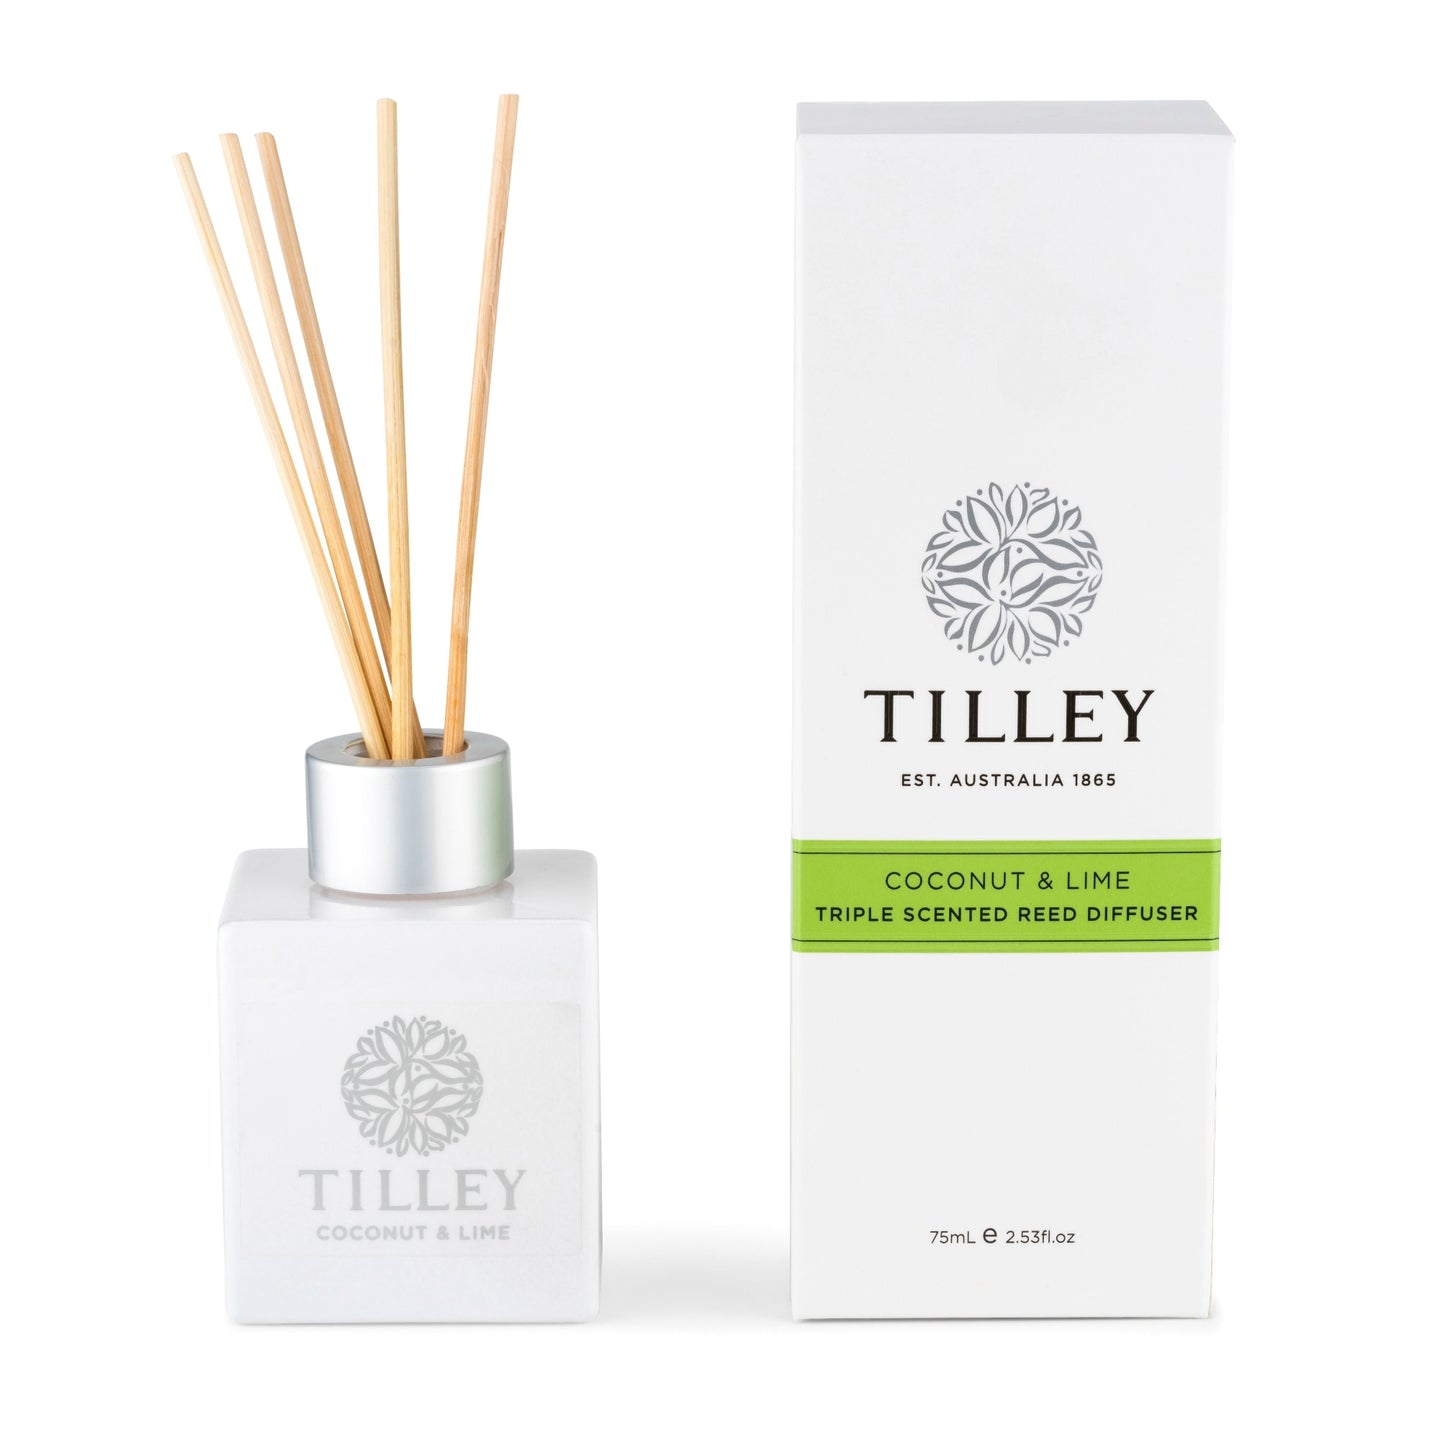 Tilley Coconut & Lime Mini Reed Diffuser